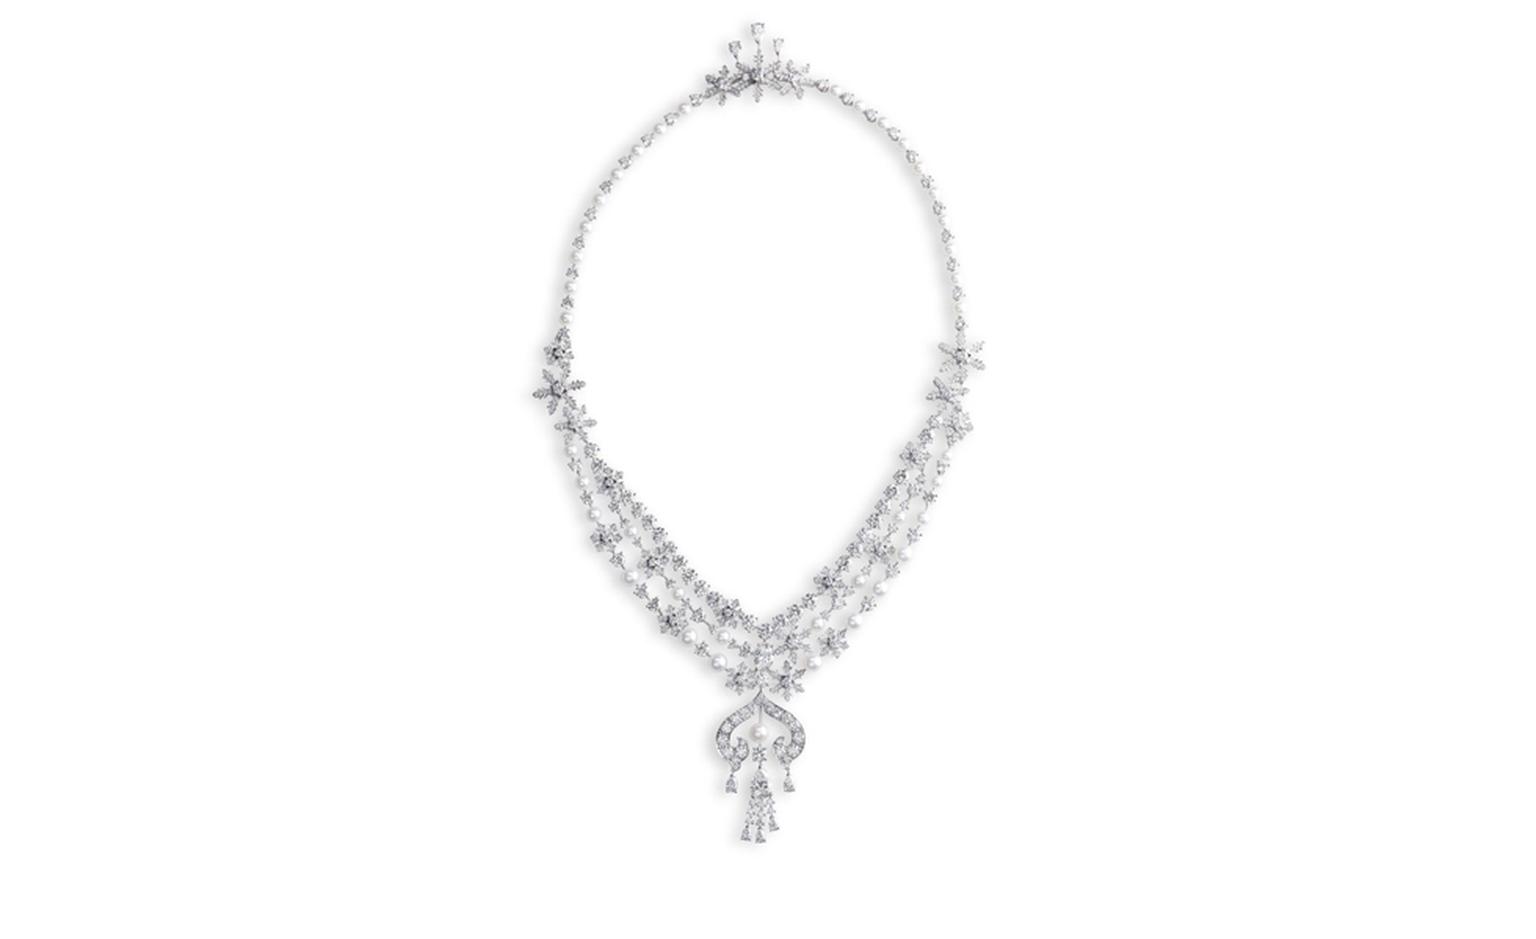 Fabergé. Le Collier Zhivago. This piece is set with white gold and features diamonds and pearls. POA